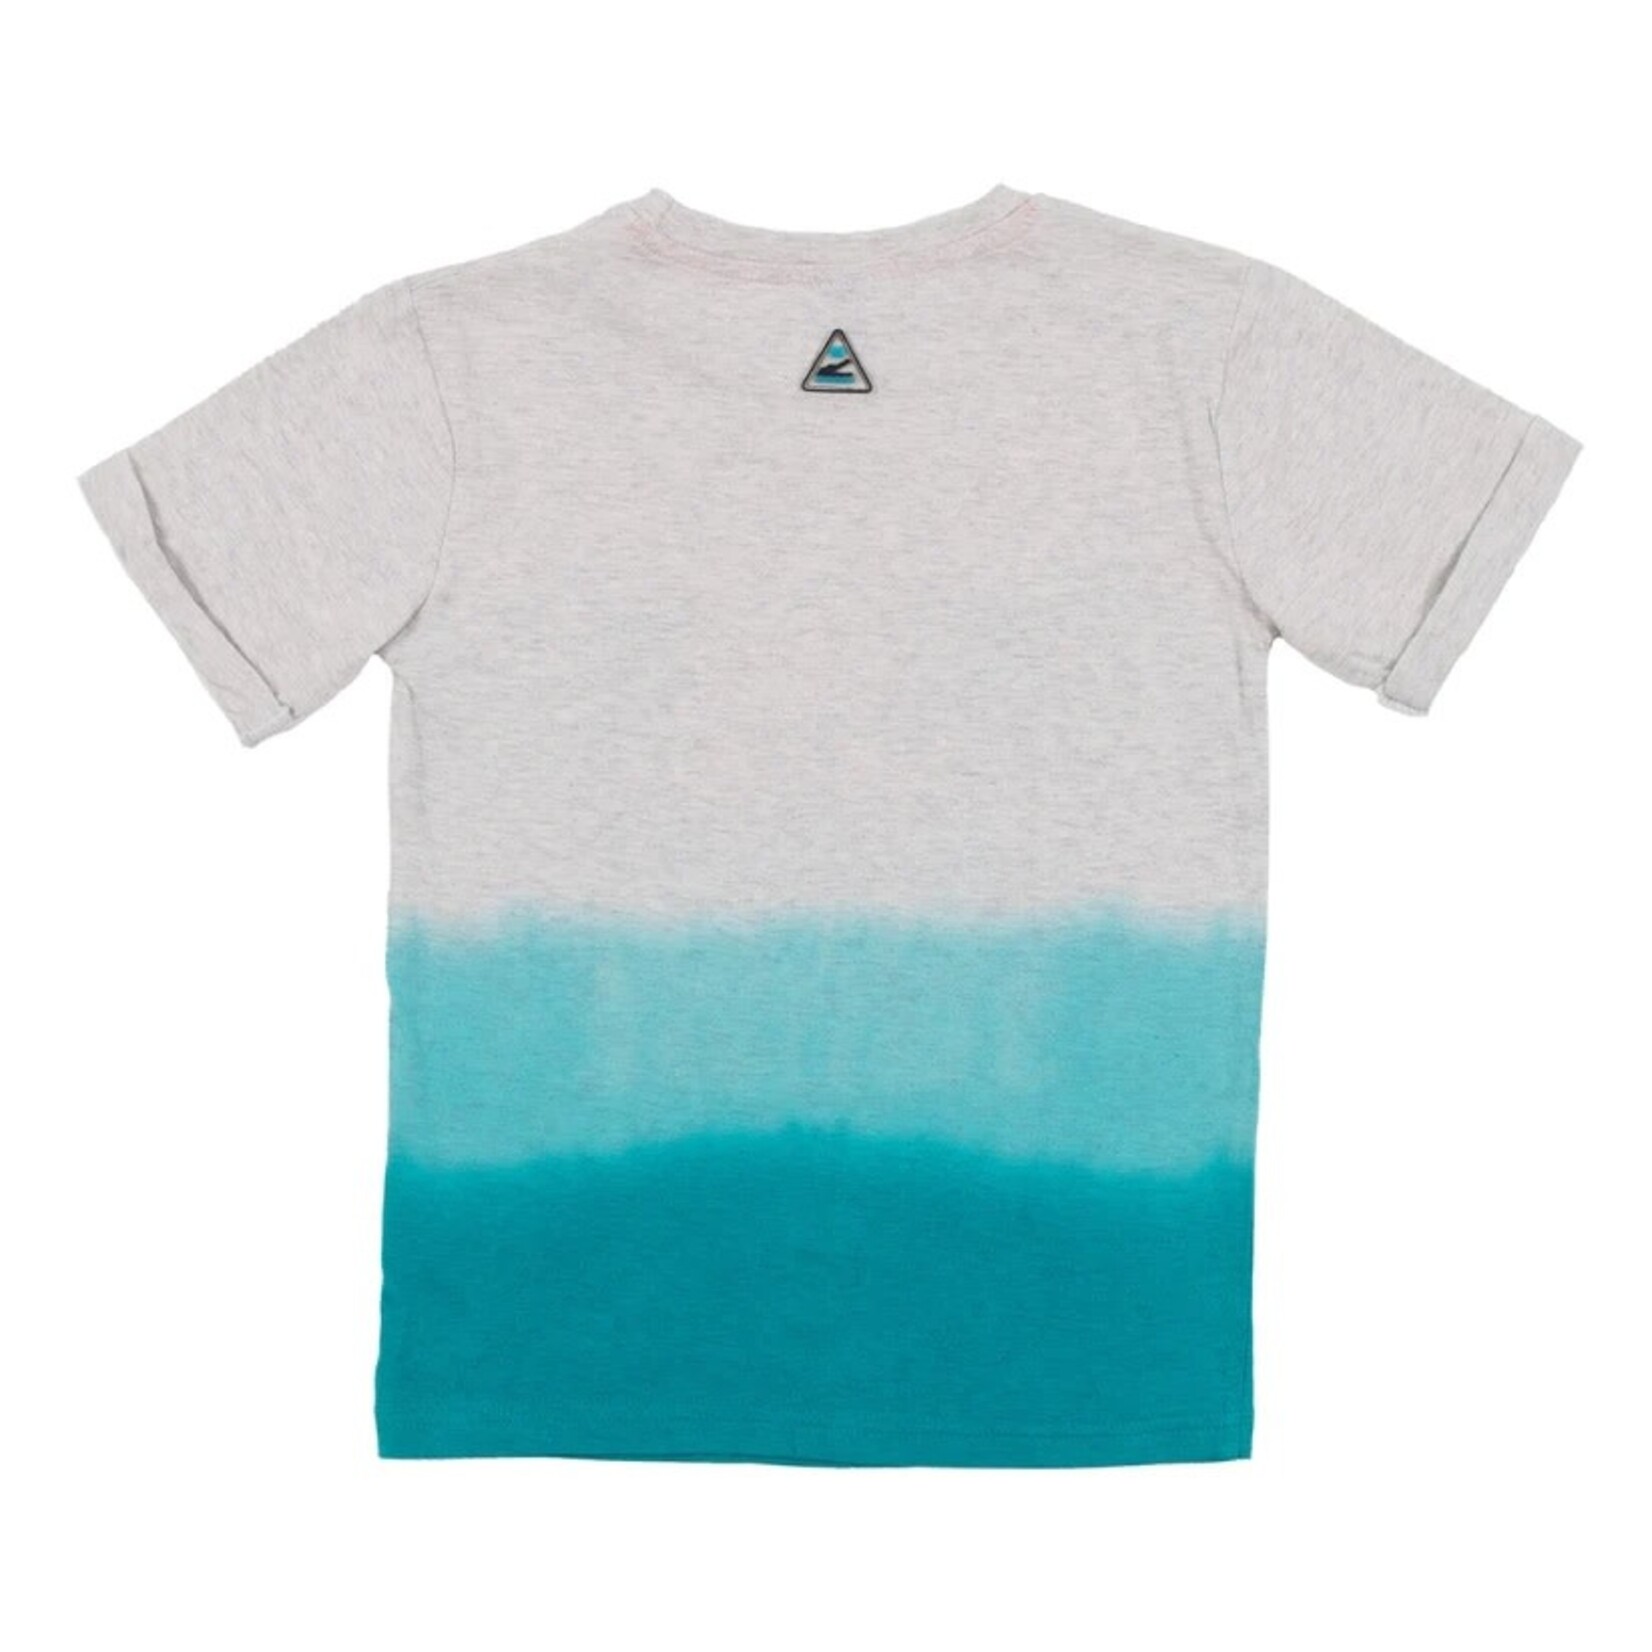 Nanö NANÖ - Short-sleeved heather gray and light blue fade t-shirt with animal print in the pool - 'Party piscine'